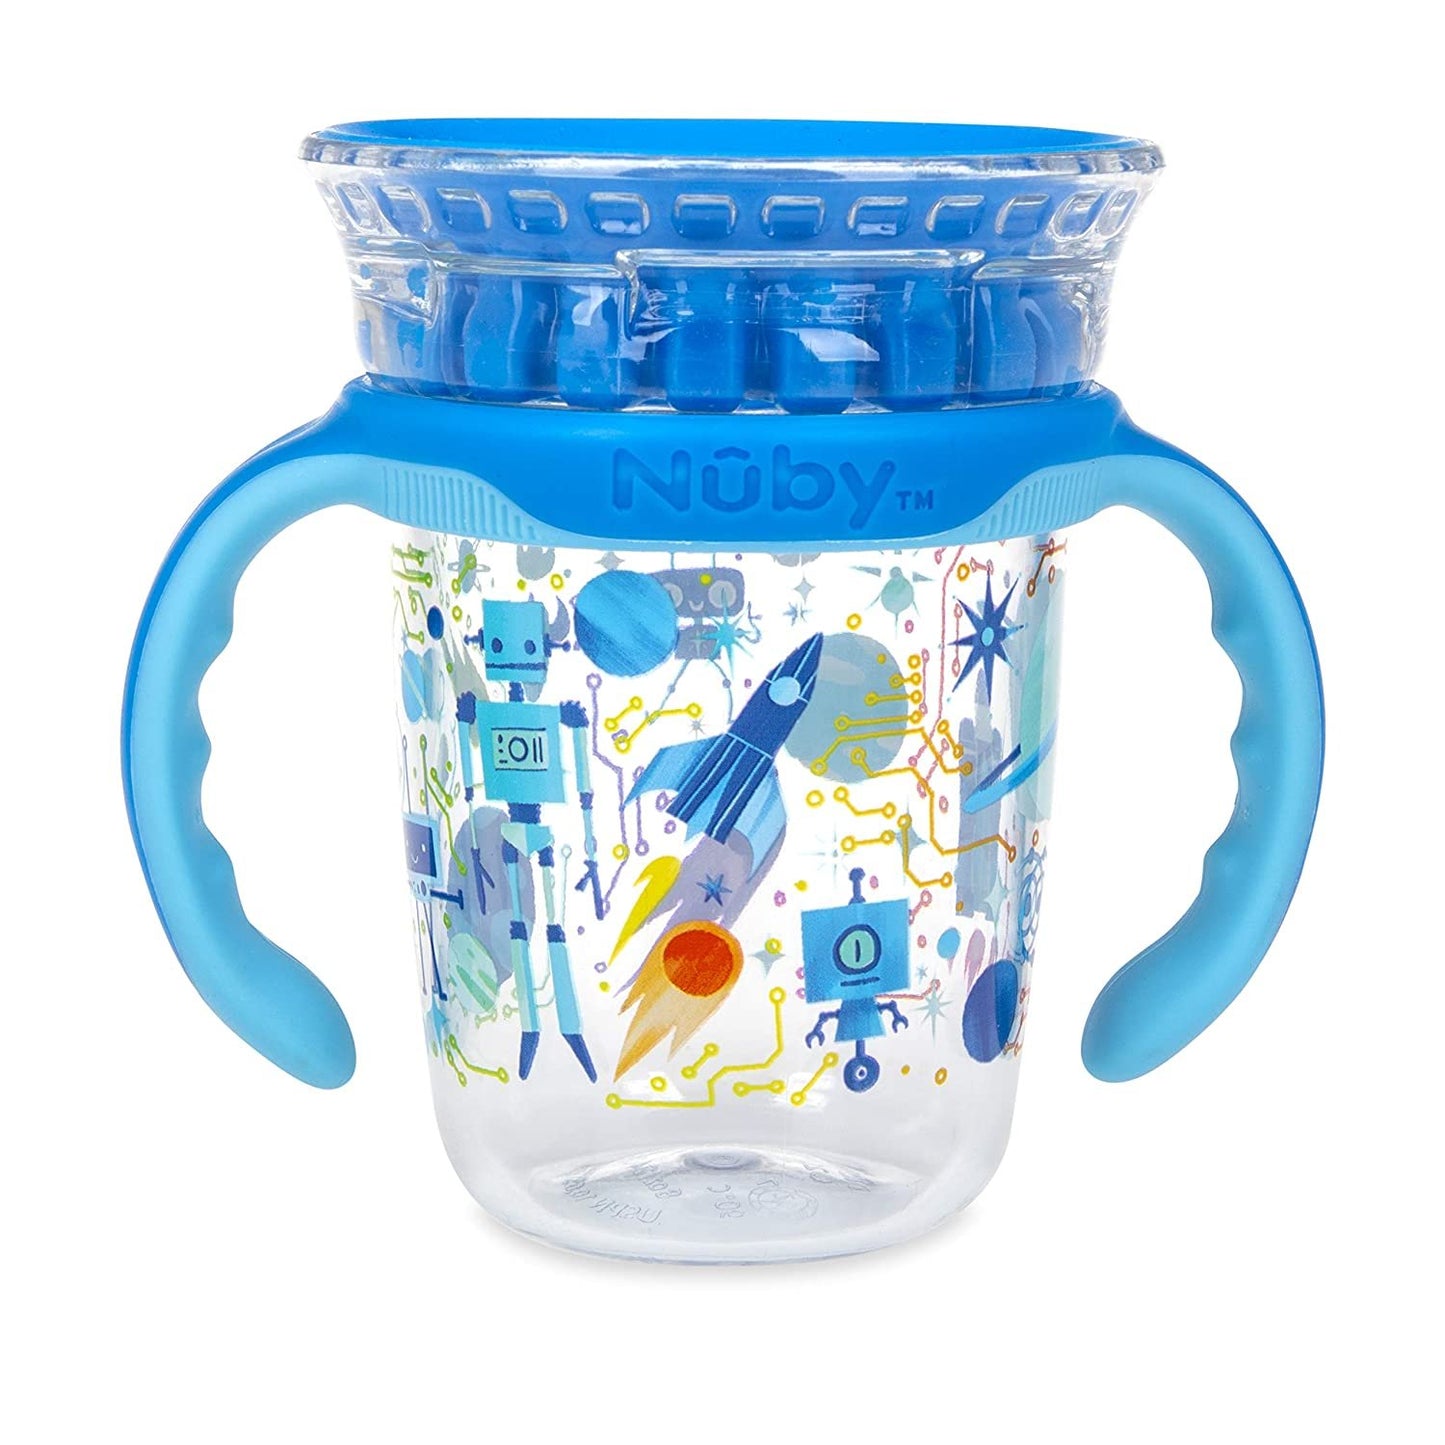 Luv N Care/NUBY Nuby 360 Edge 2 Stage Drinking Rim Cup with Removable Handles & hygienic Cover: 8 Oz/ 240 Ml, 12M+, Robot, Blue